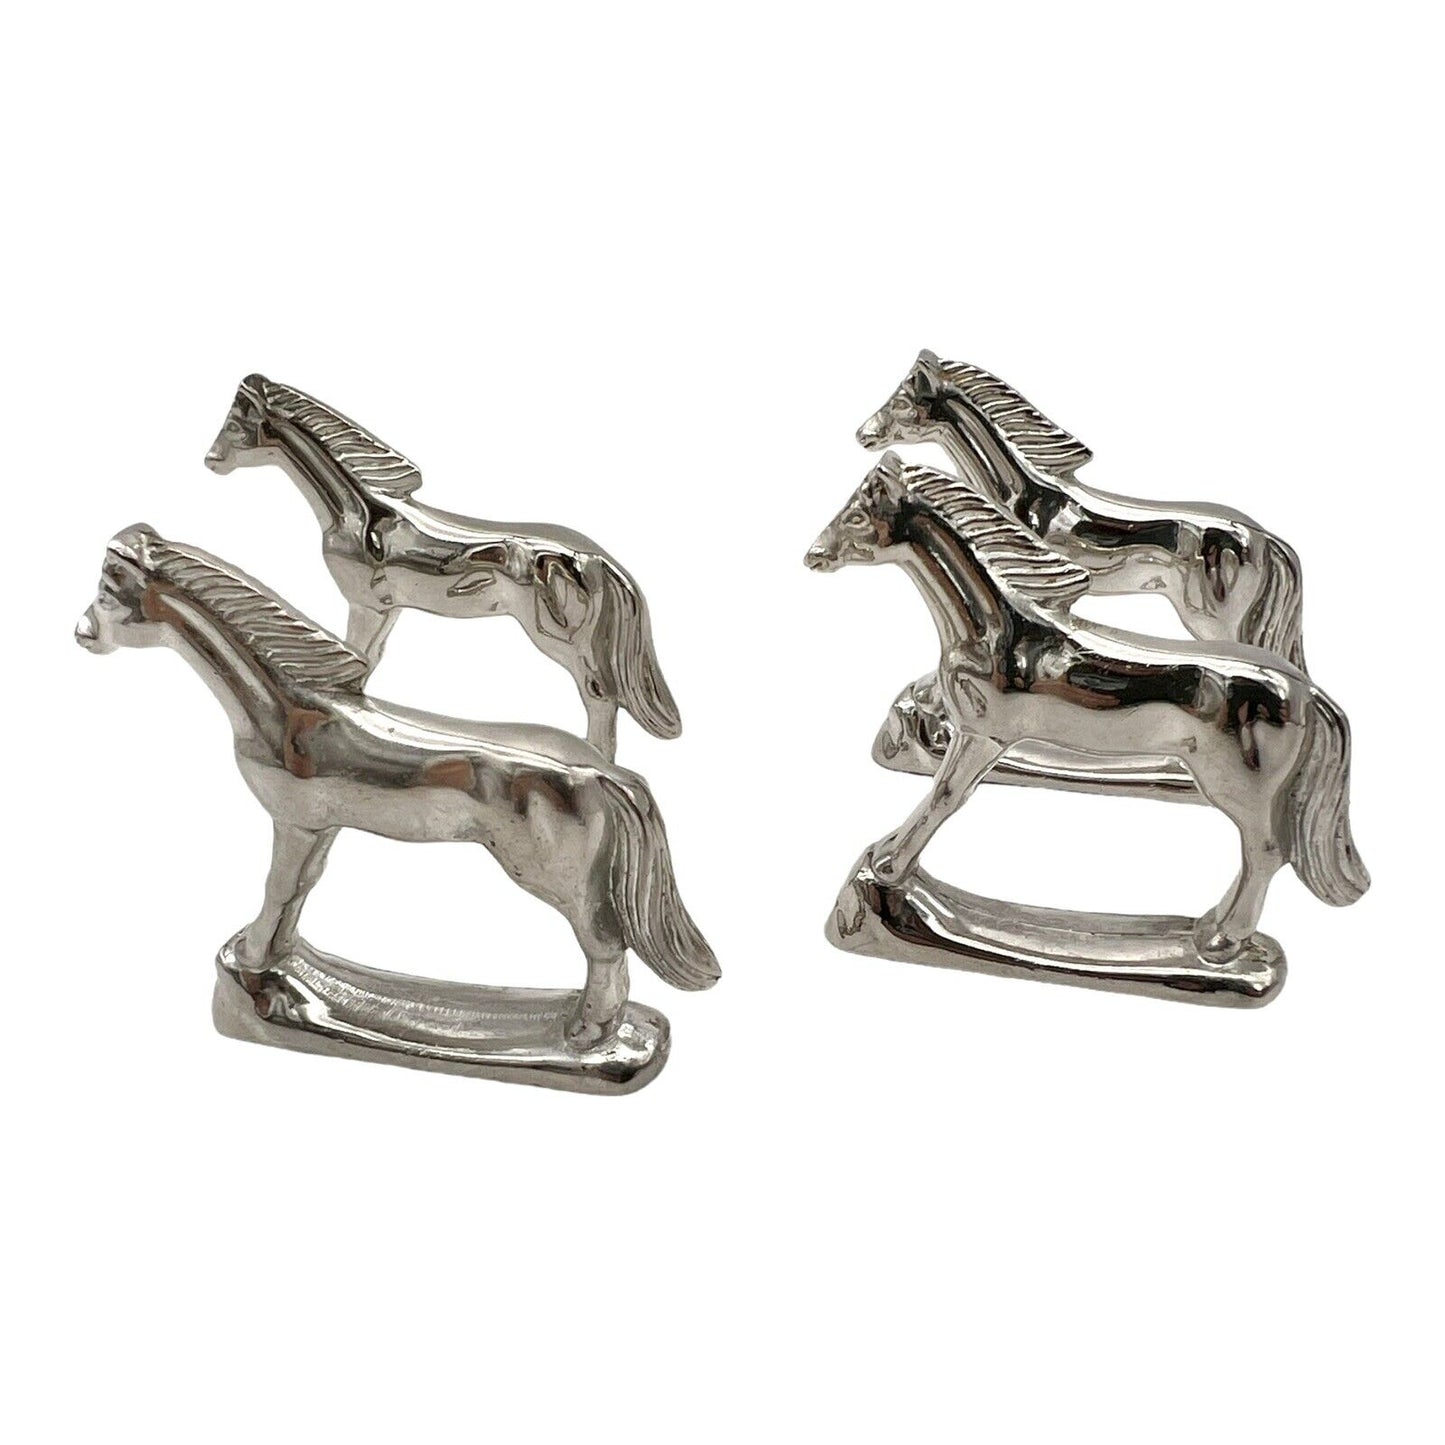 French silver plated horse shaped napkin rings sold by All Things French Store